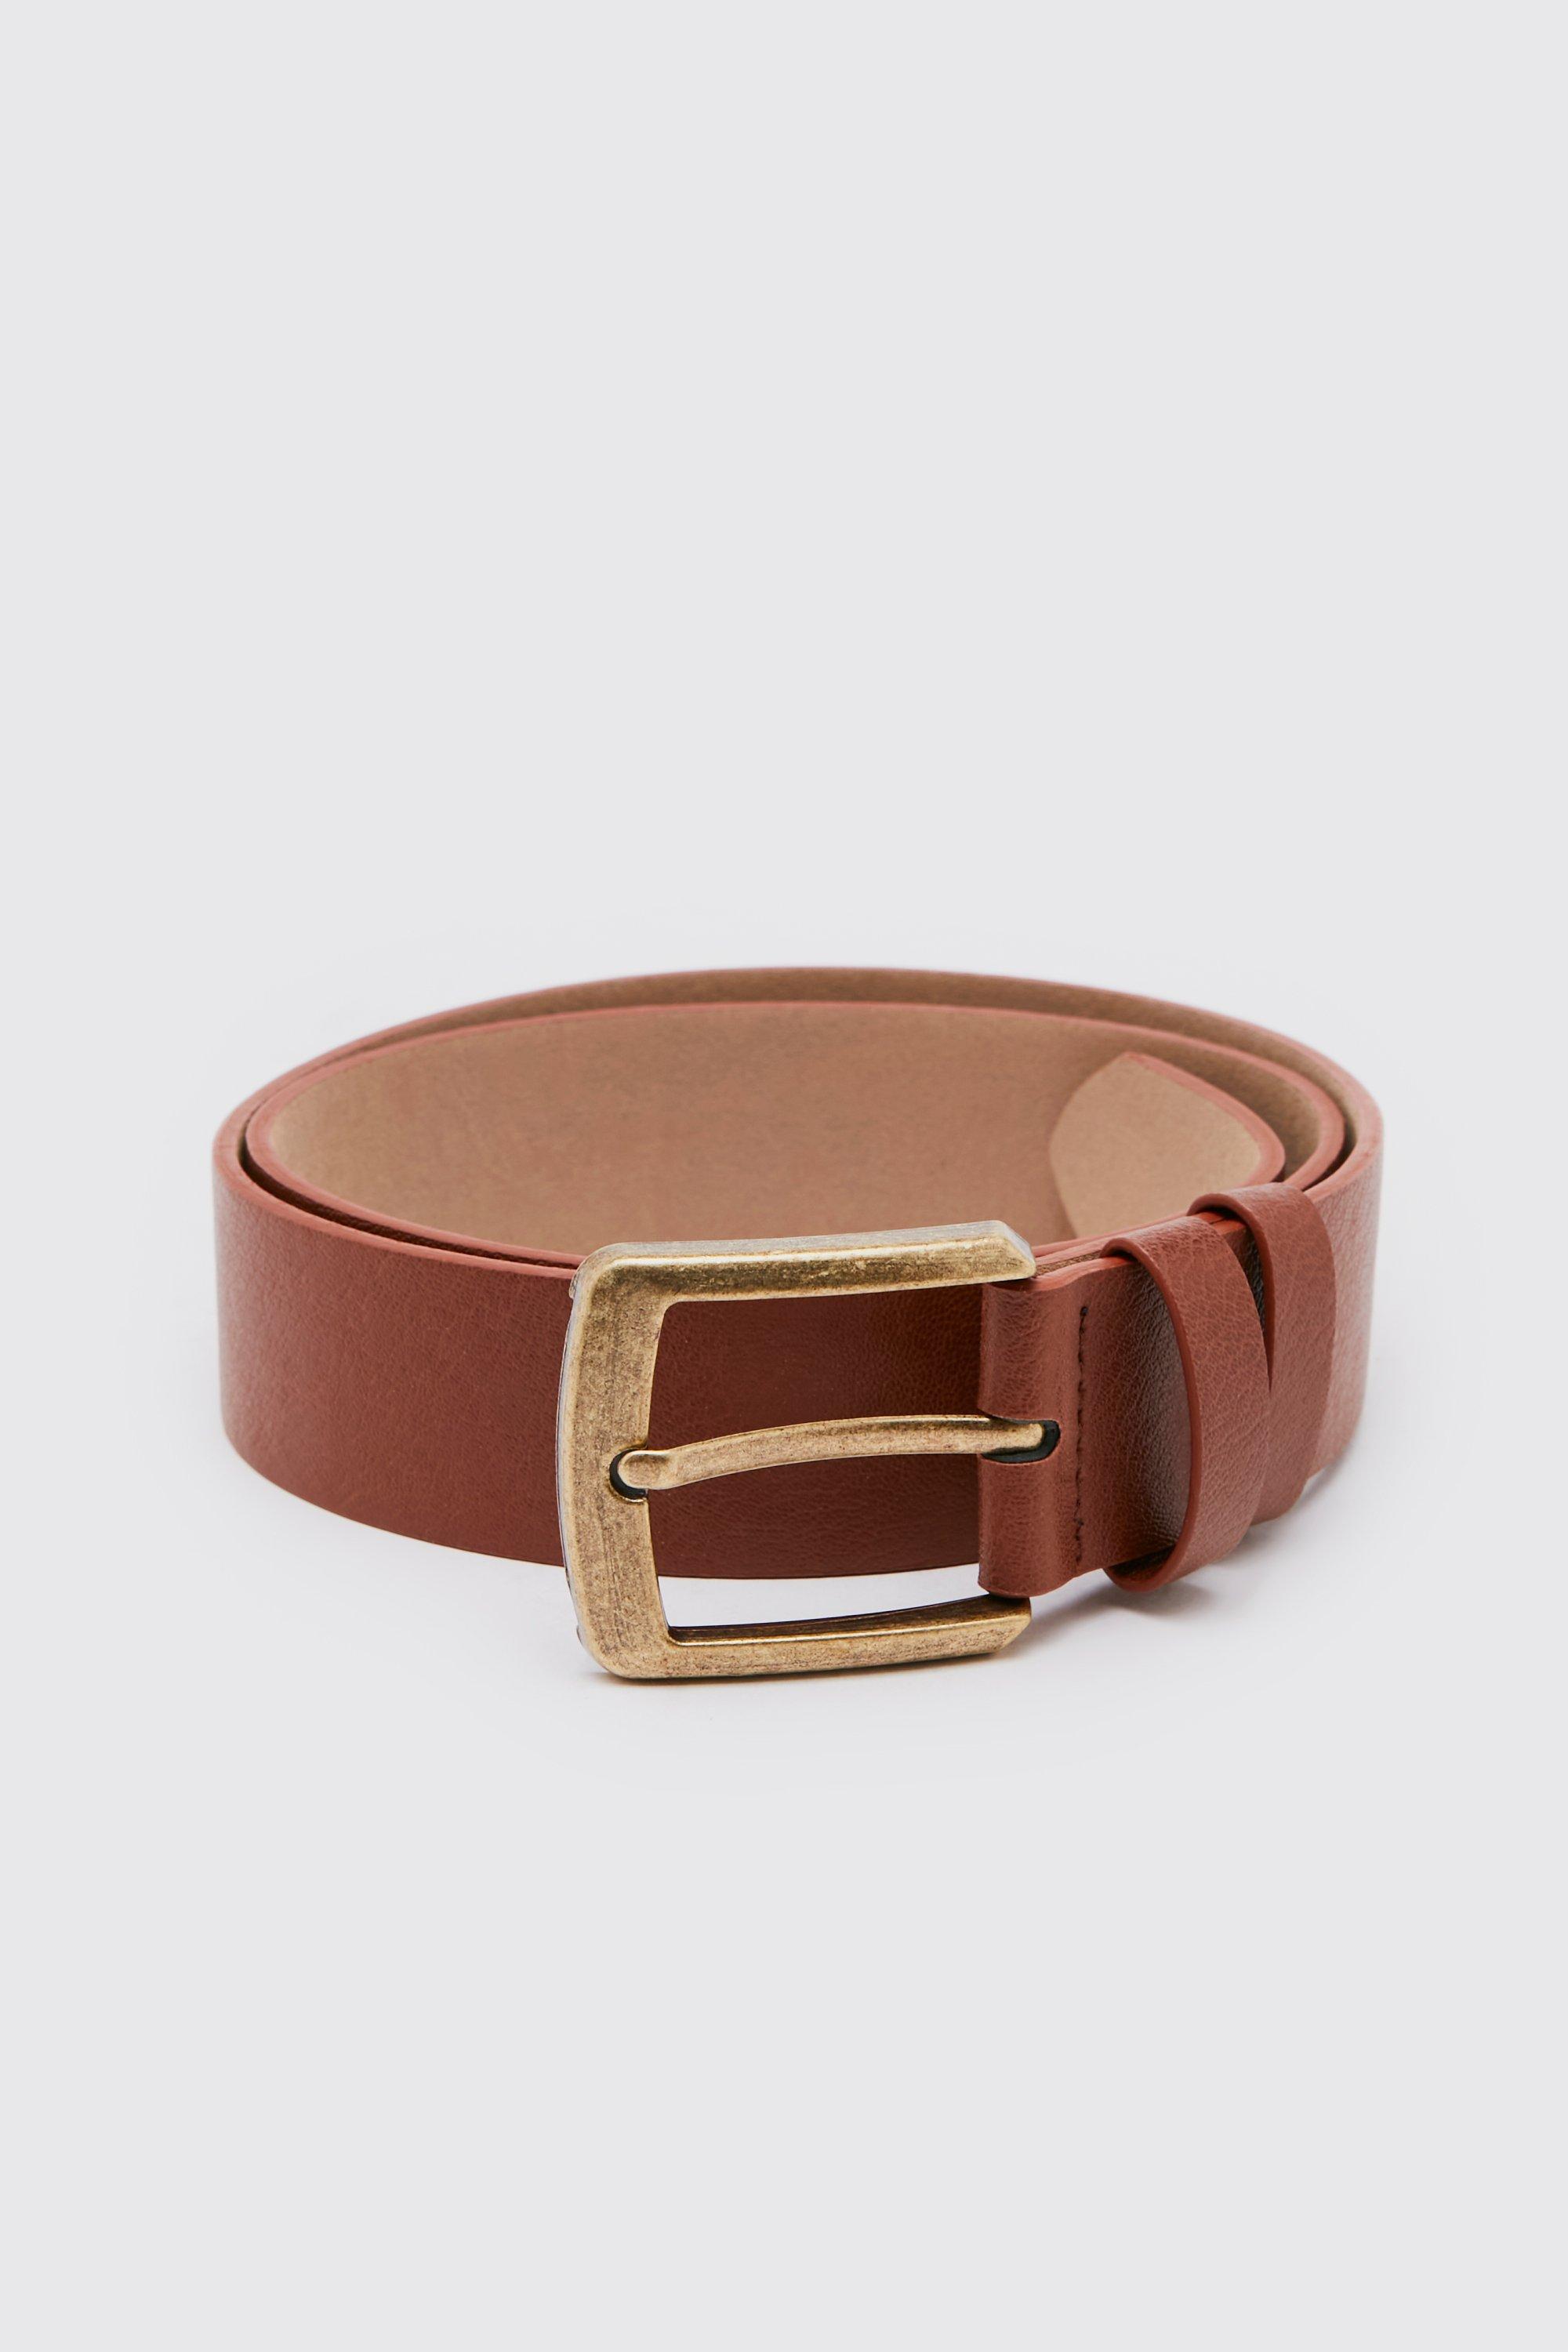 Boohoo Casual Leather Look Jeans Belt, Tan